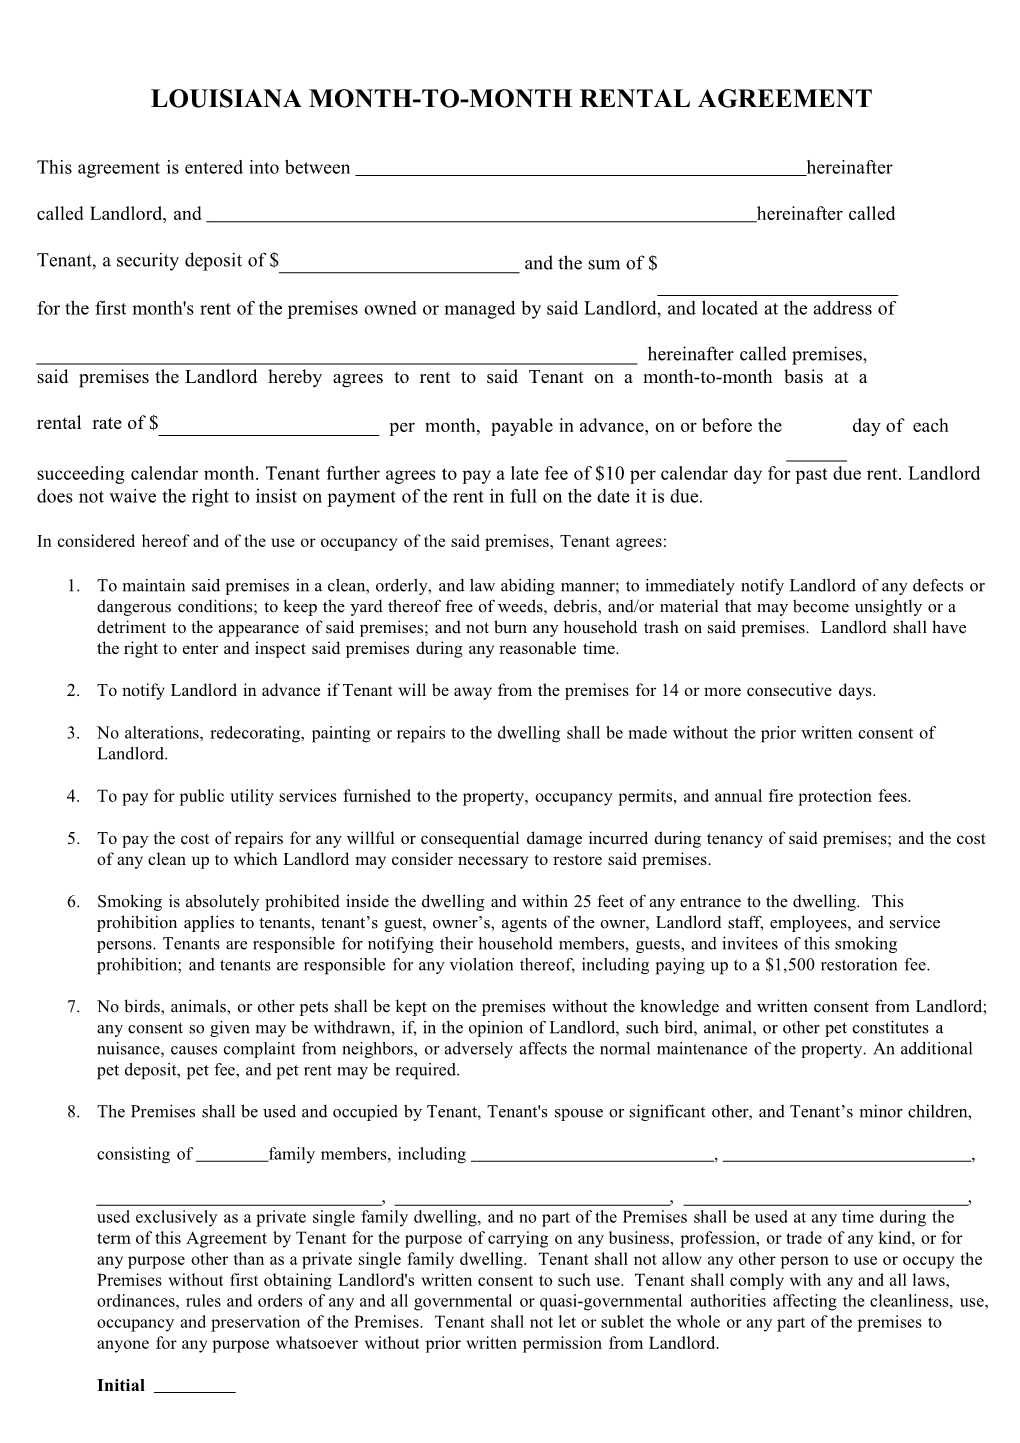 Louisiana Residential Monthly Agreement 022713